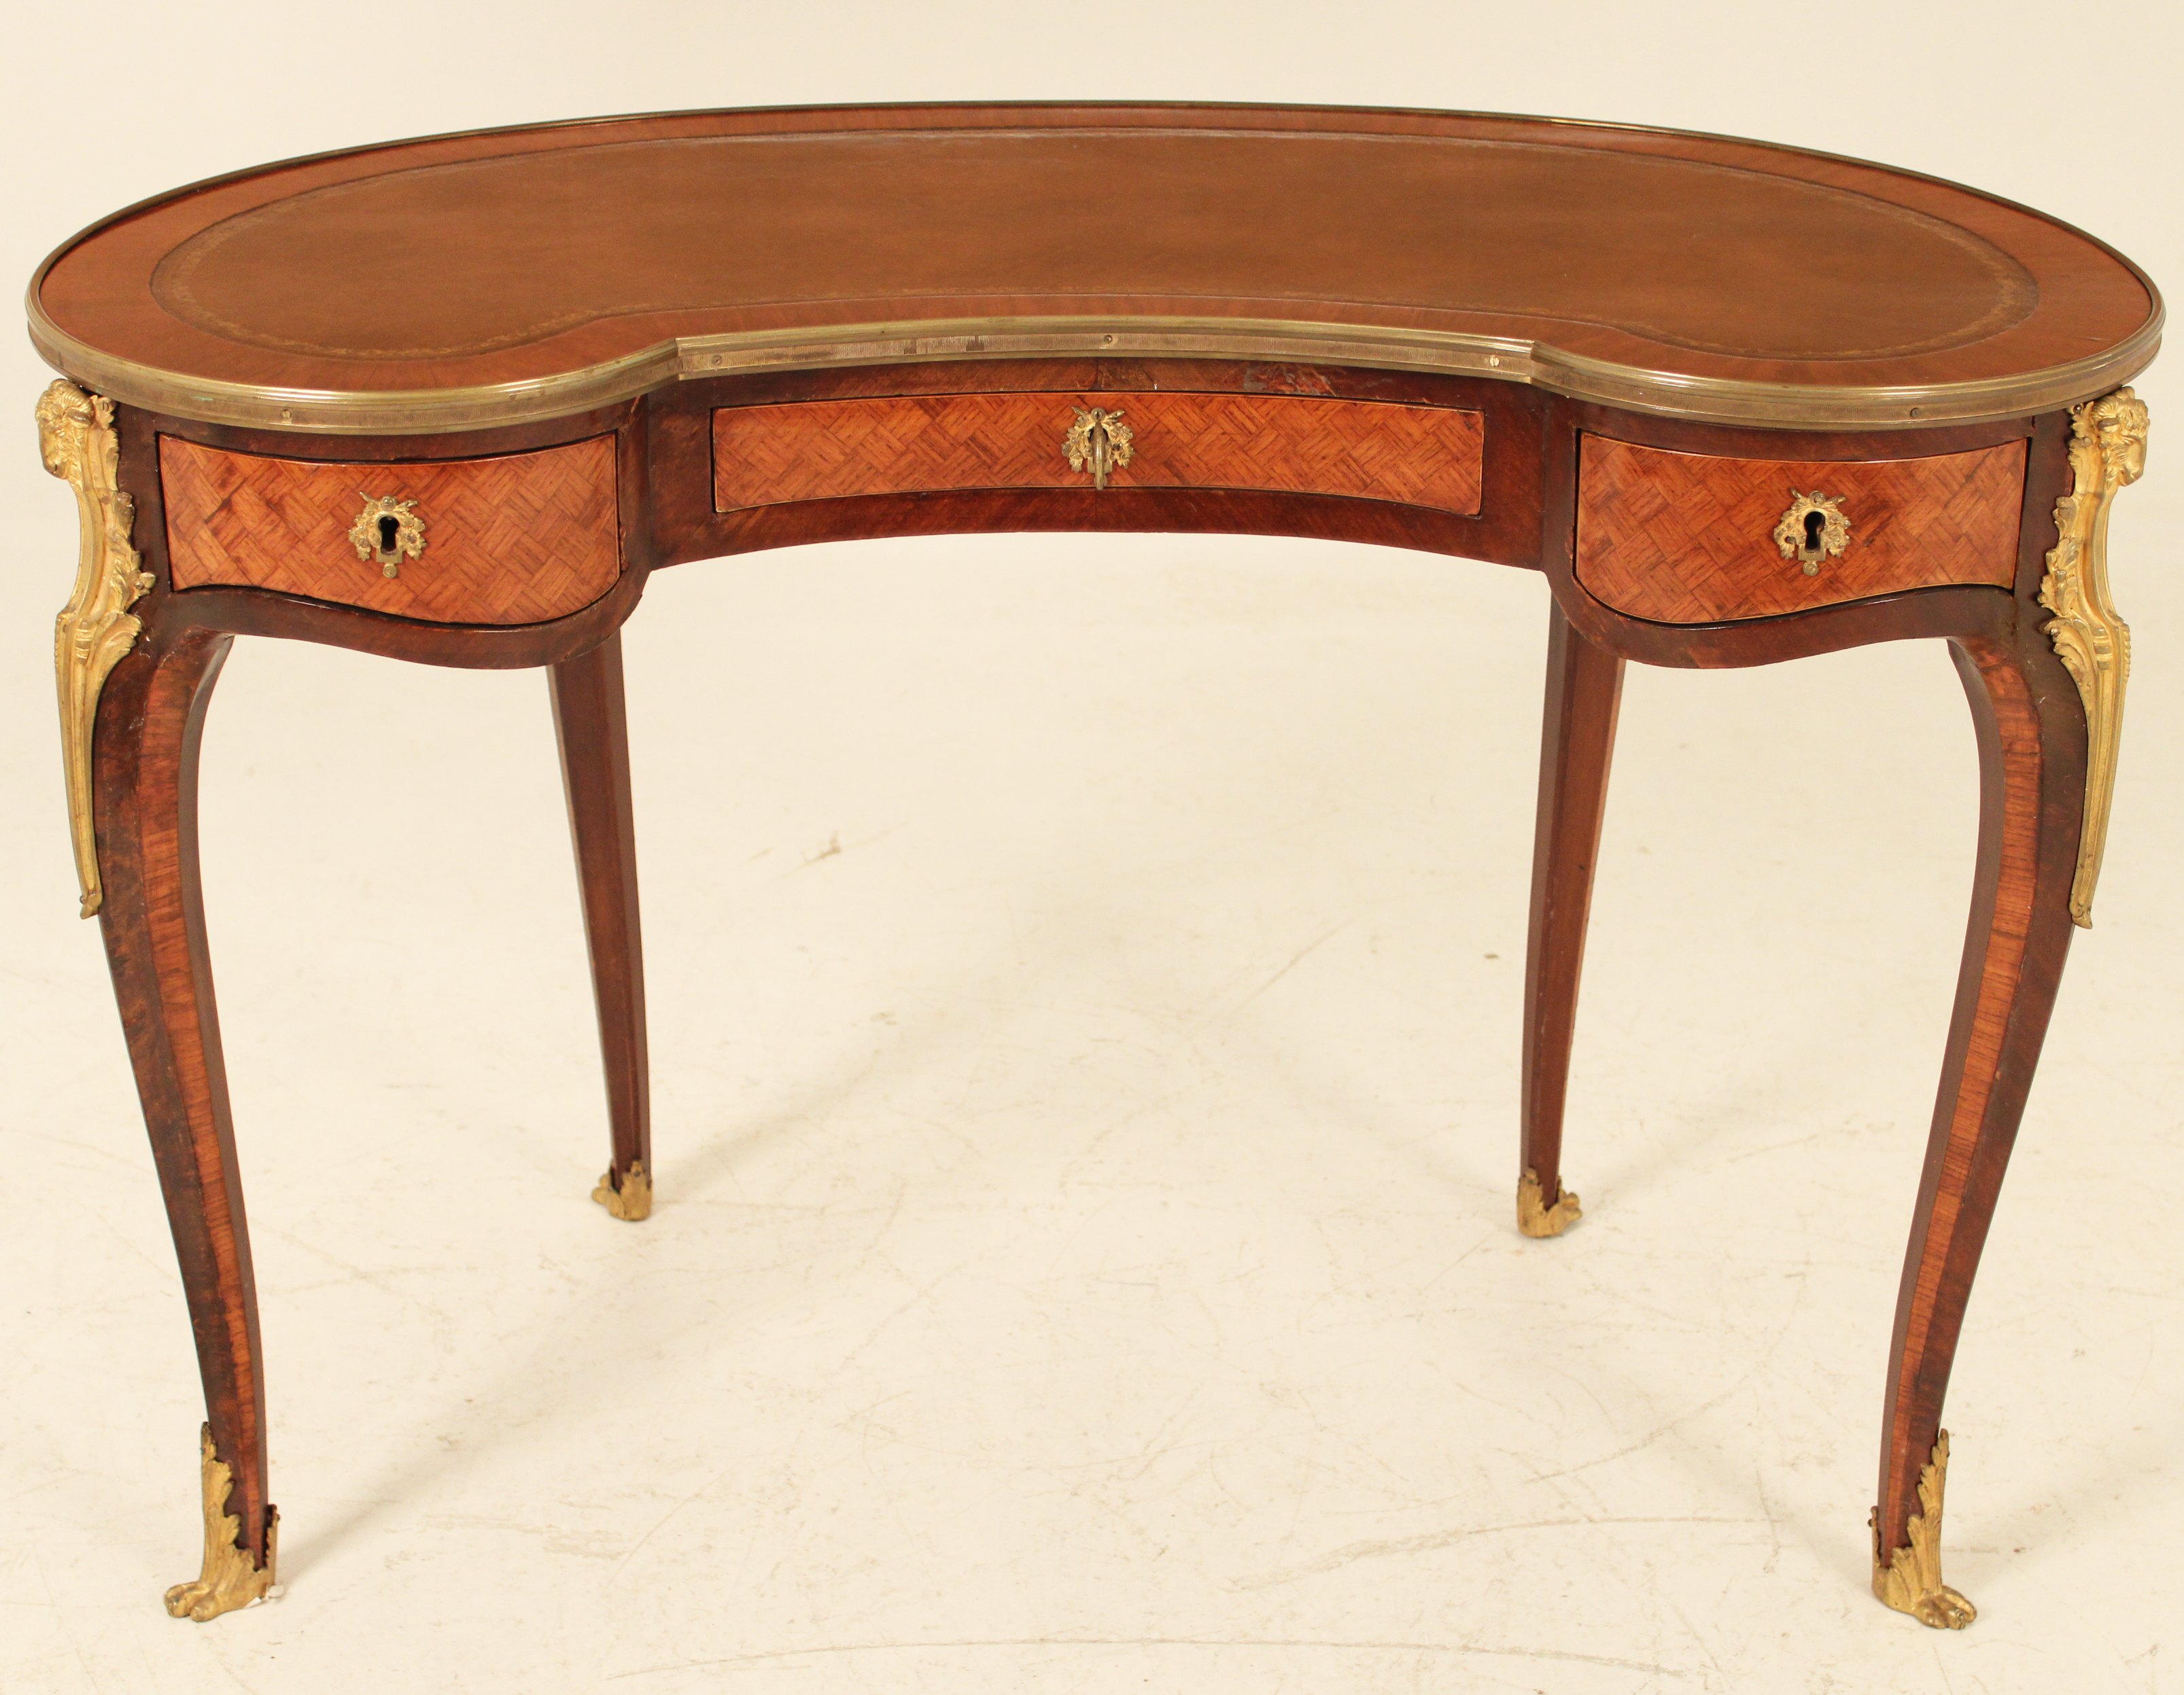 LOUIS XV STYLE KIDNEY SHAPED INLAID 35e864